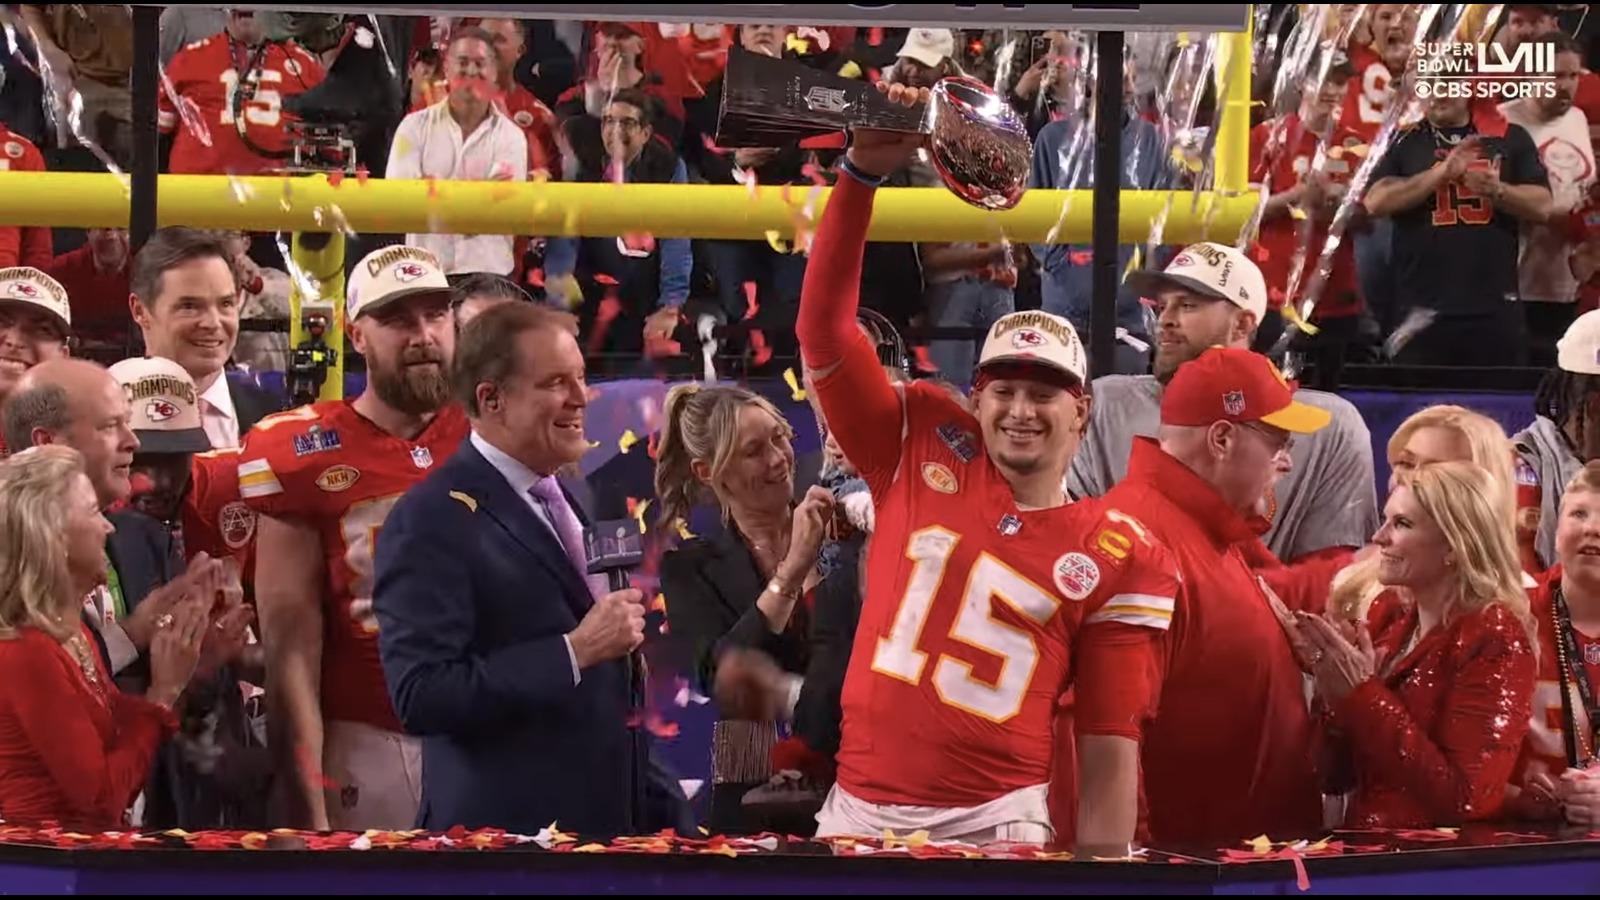 Tony Romo stamps Patrick Mahomes and the Kansas City Chiefs as a dynasty following Super Bowl LVIII victory